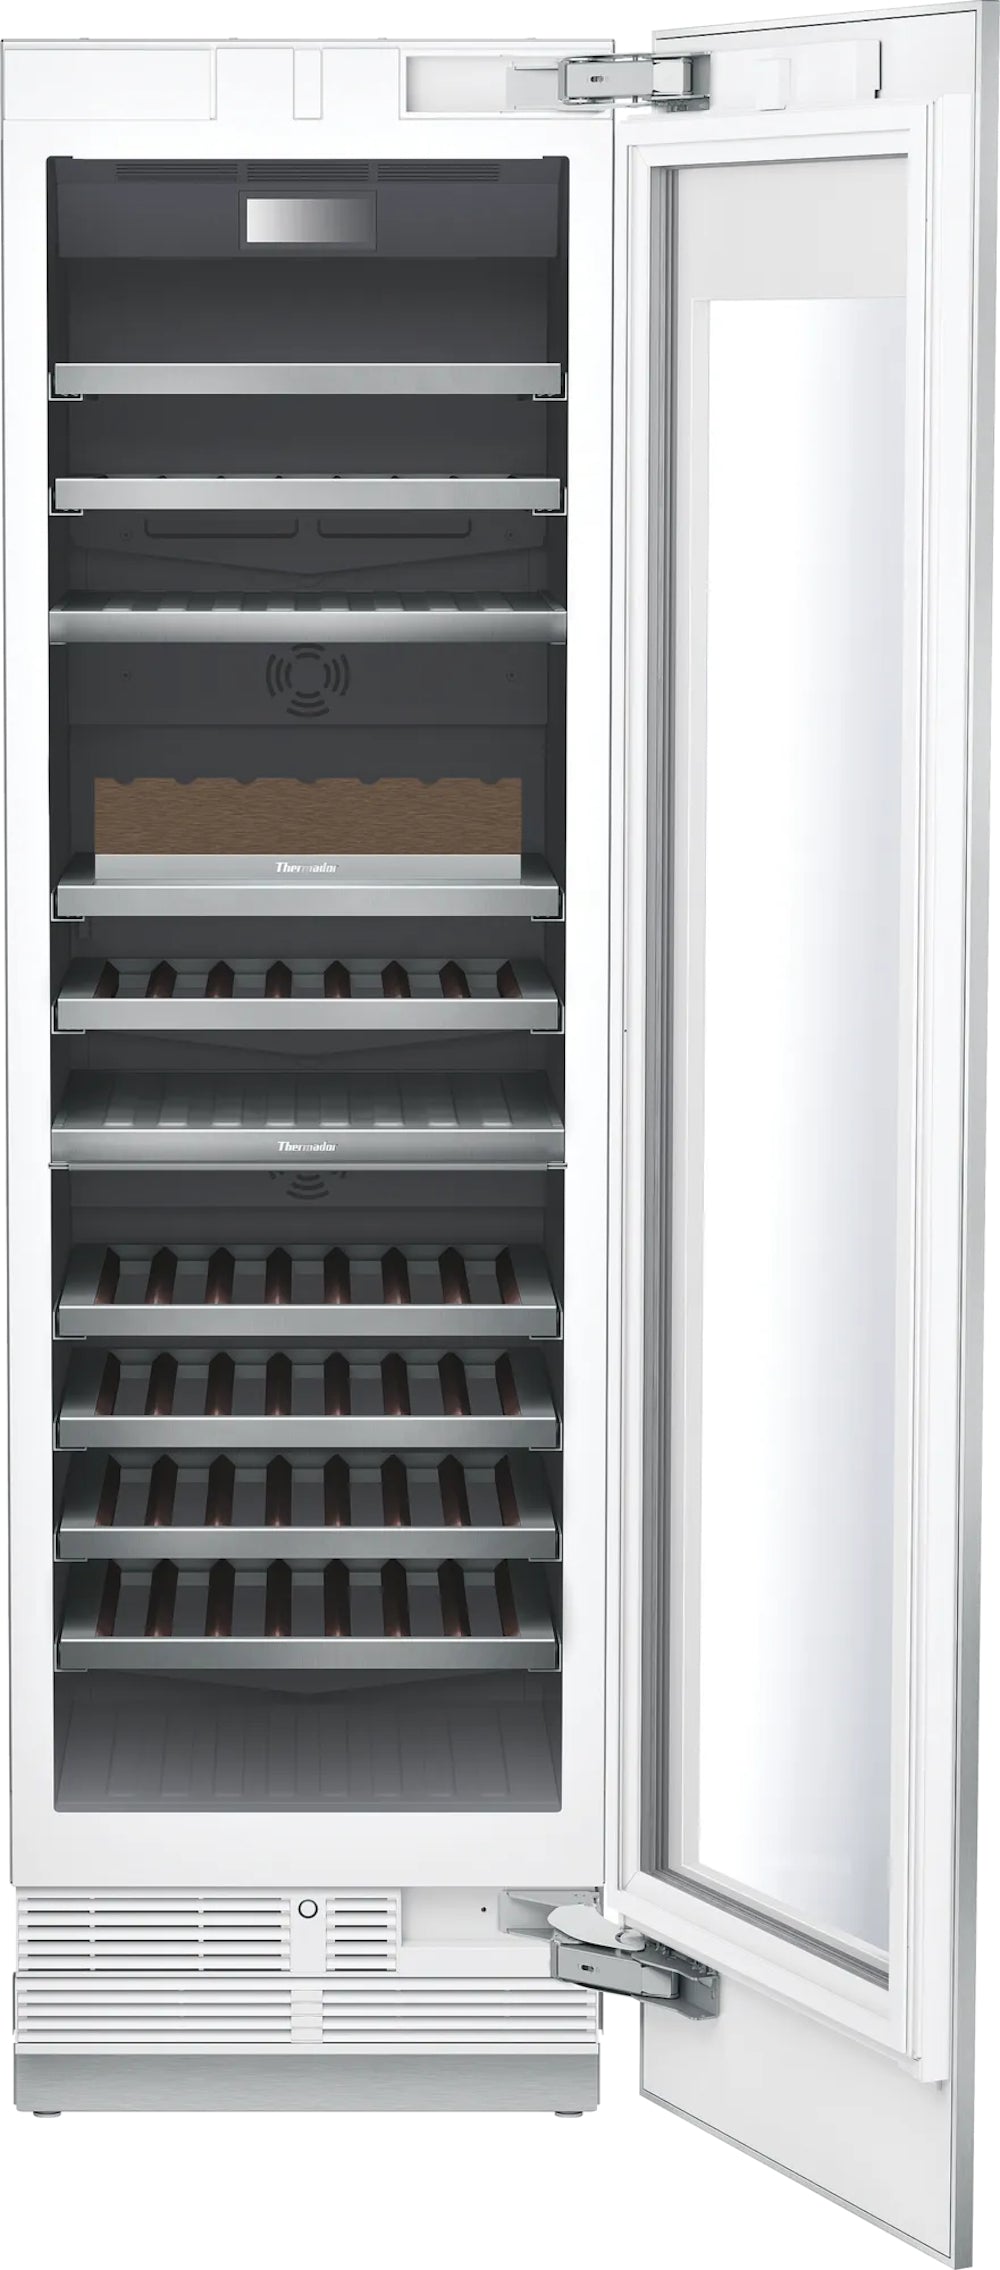 Thermador - 23.75 Inch  cu. ft Wine Fridge Refrigerator in Panel Ready - T24IW901SP